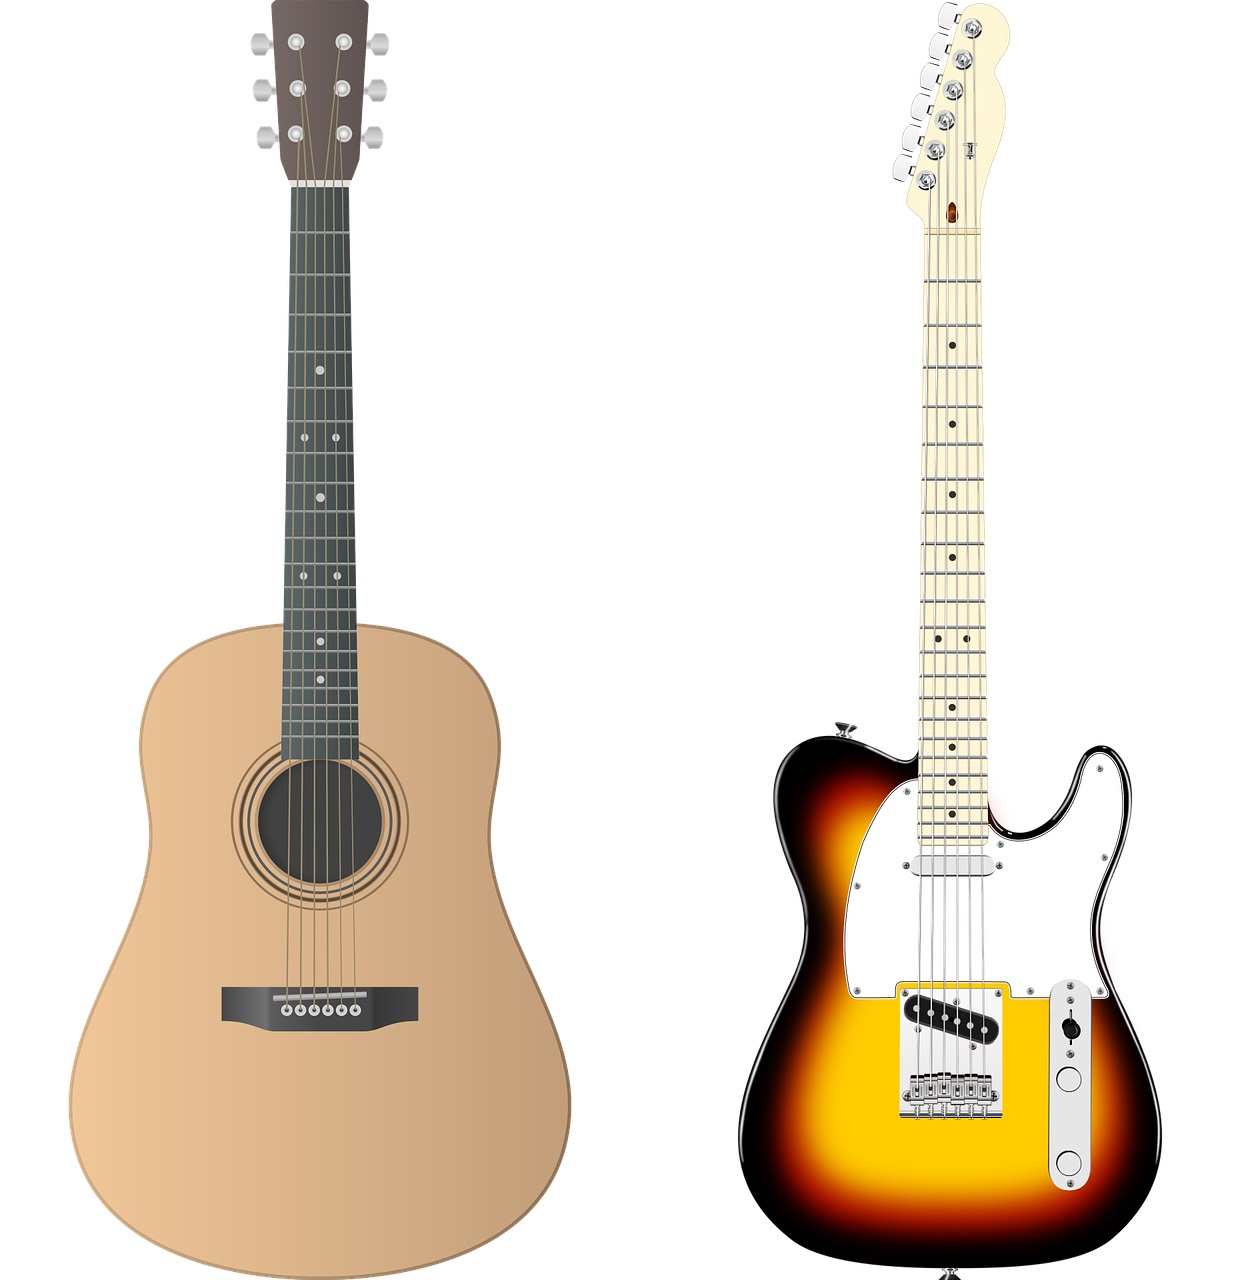 Pros and cons of learning on an acoustic or electric guitar